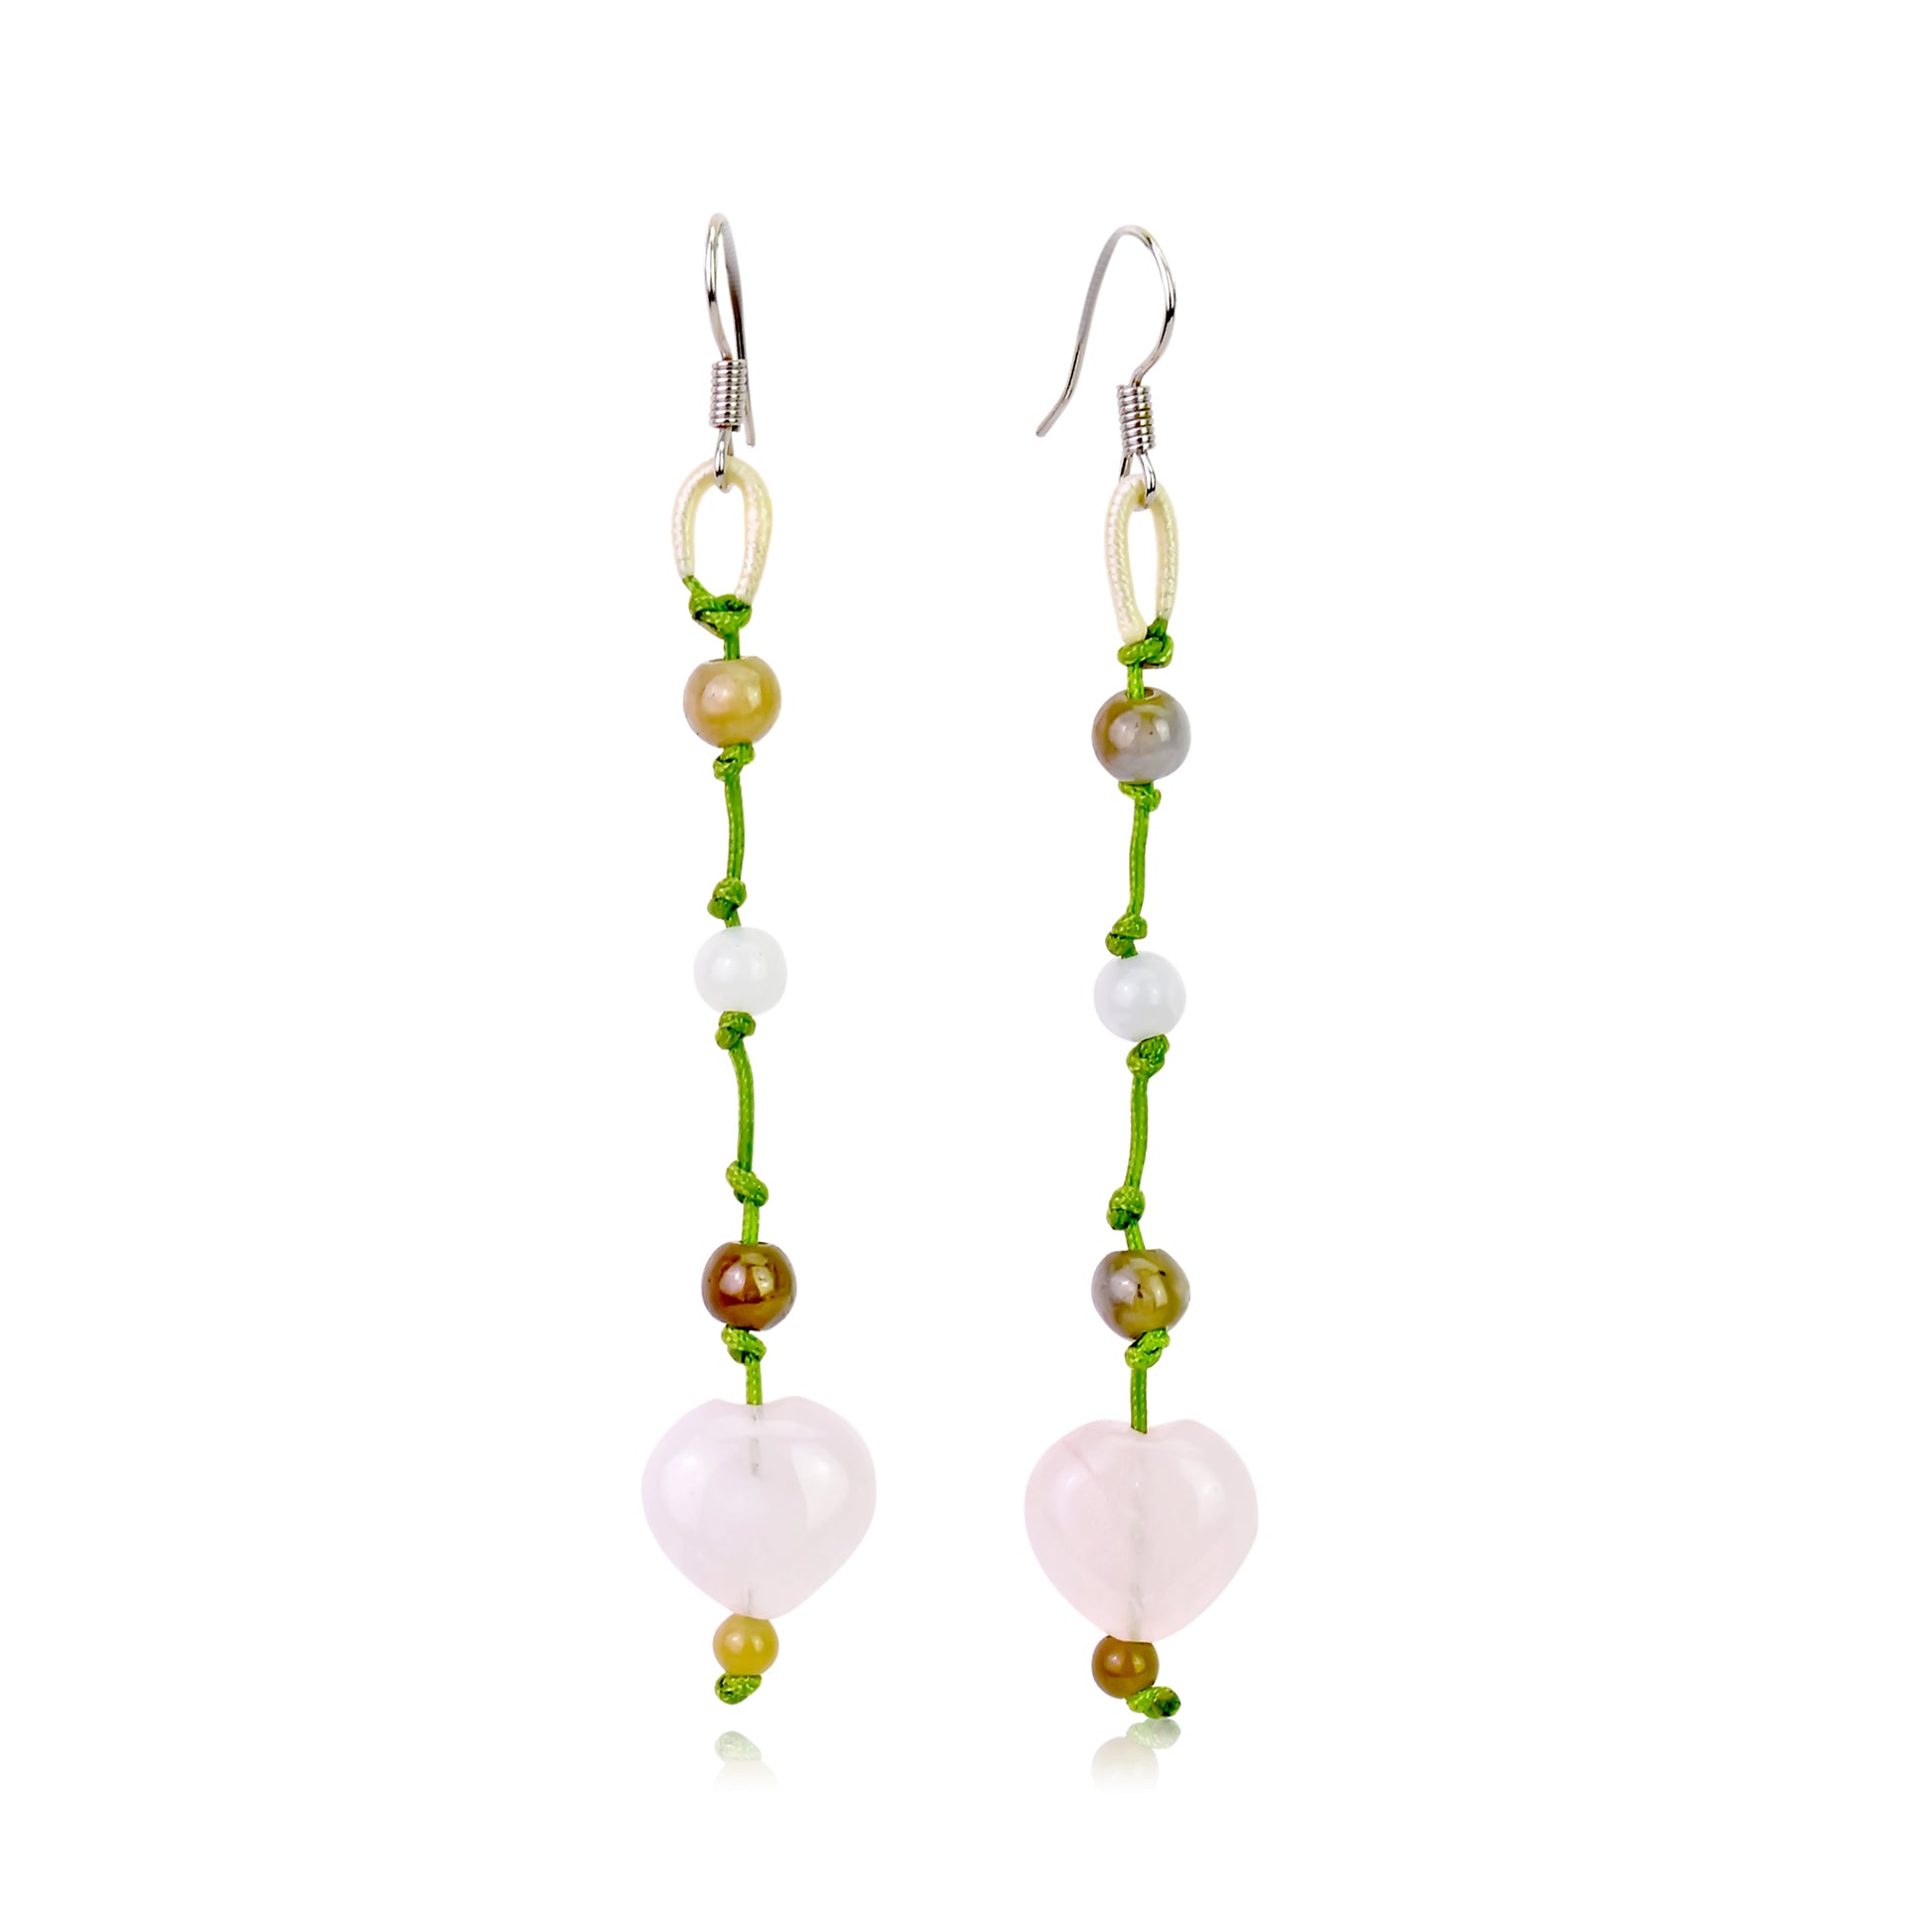 Add a Pop of Color with Rose Quartz Heart Earrings made with Lime Cord